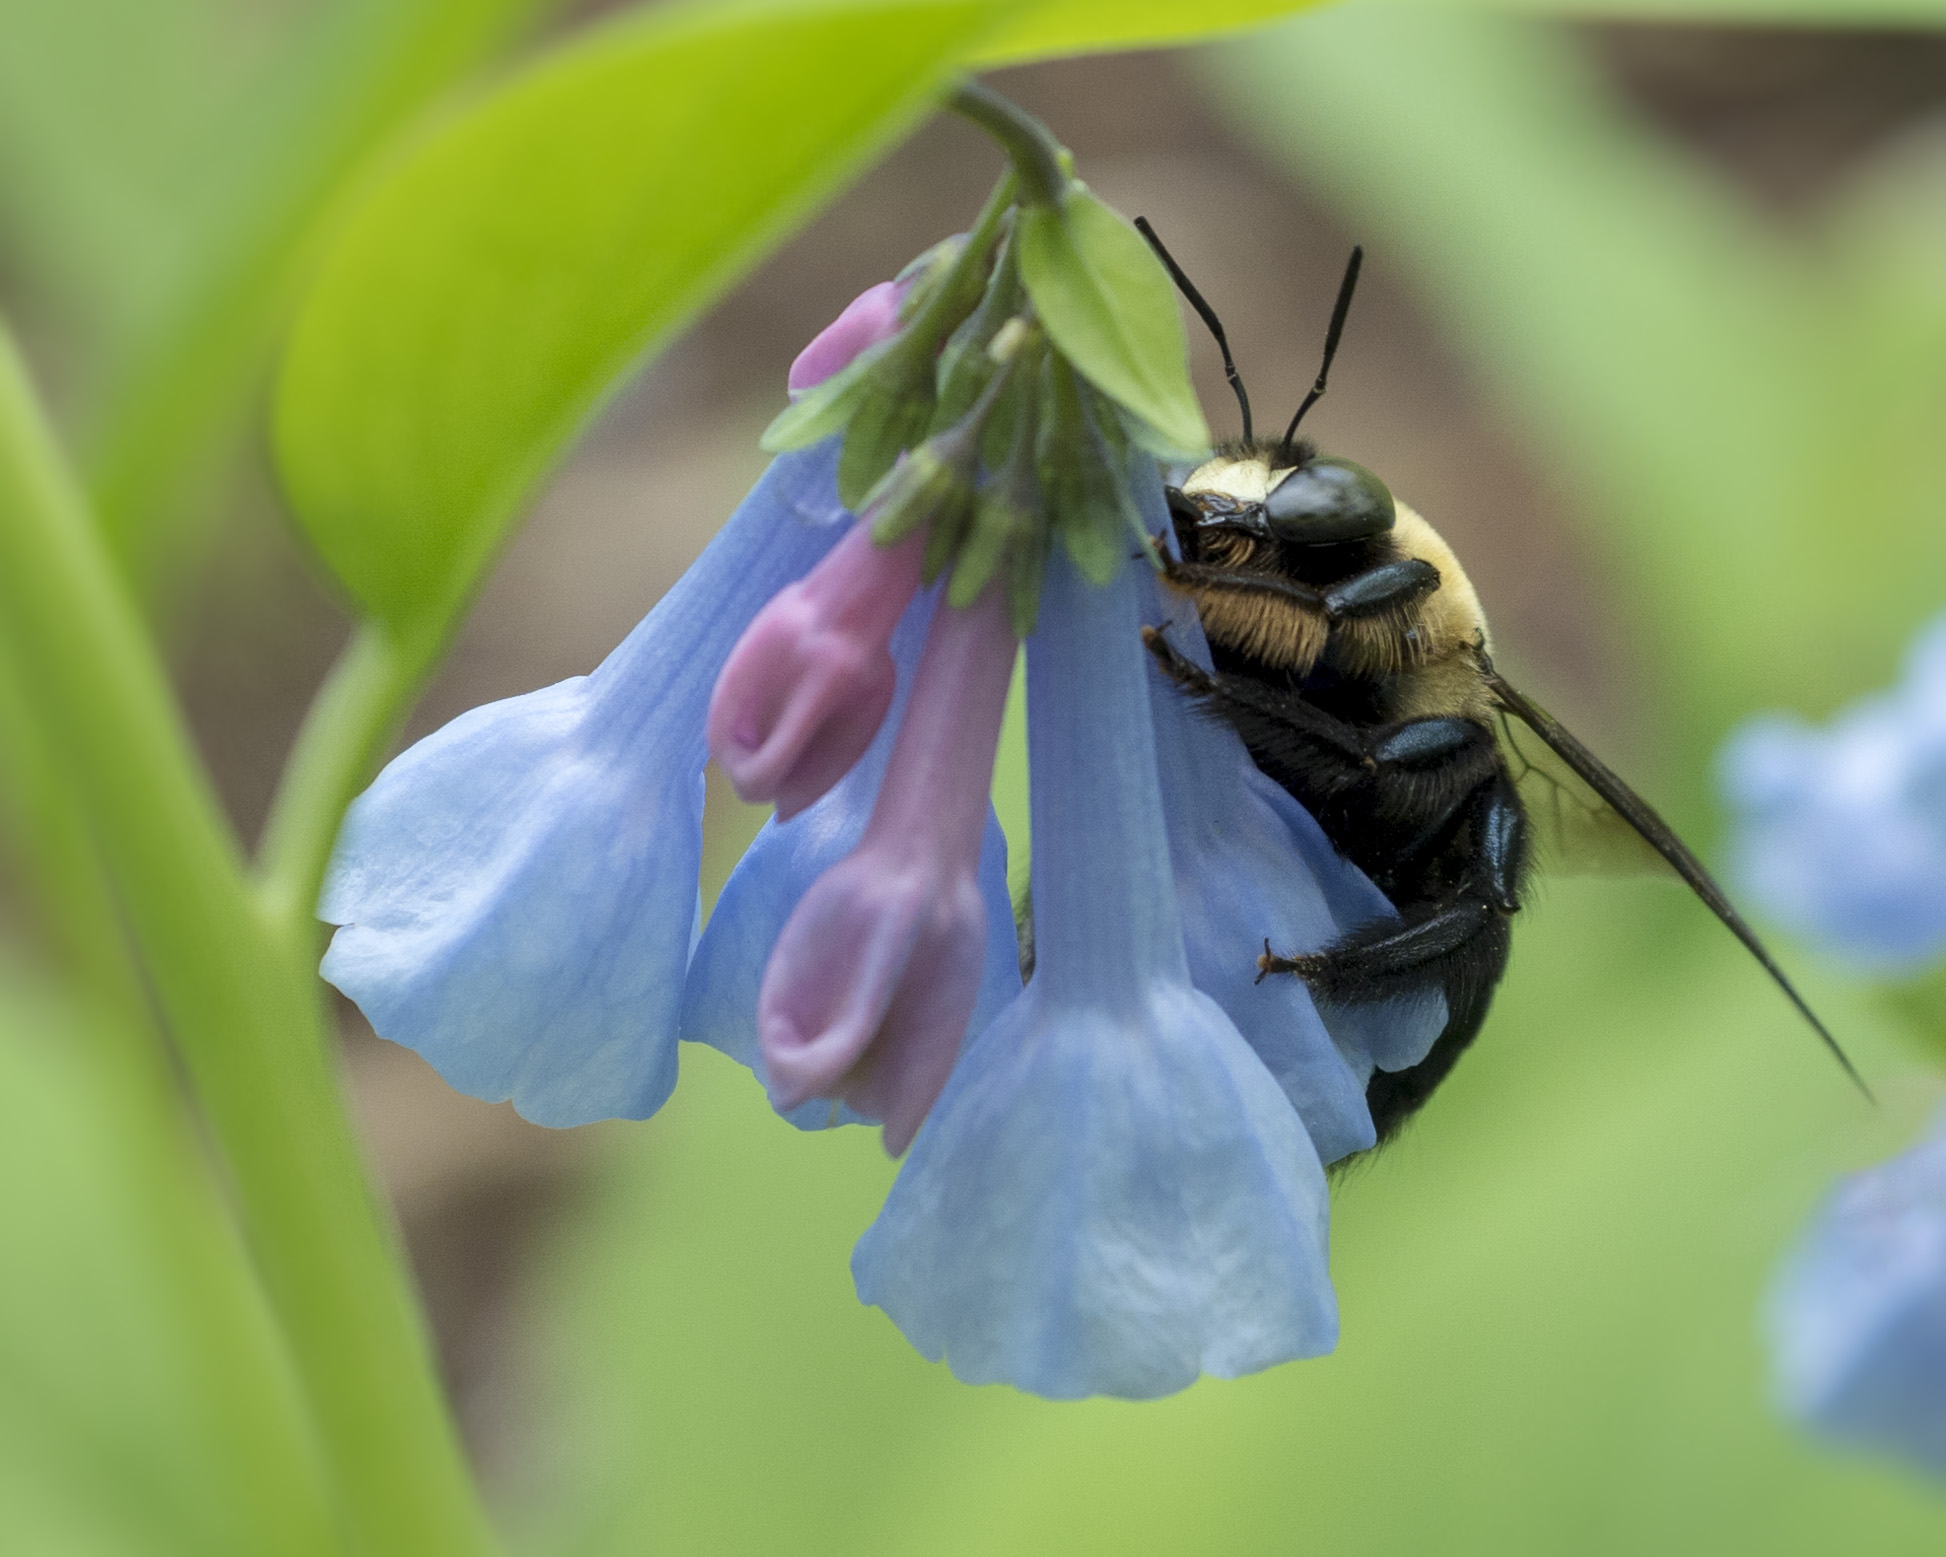 A bumblebee pauses from a busy day of pollinating on some Virginia Bluebells at Leonard J. Buck Garden in Far Hills, NJ. Photo: Matthew Drews